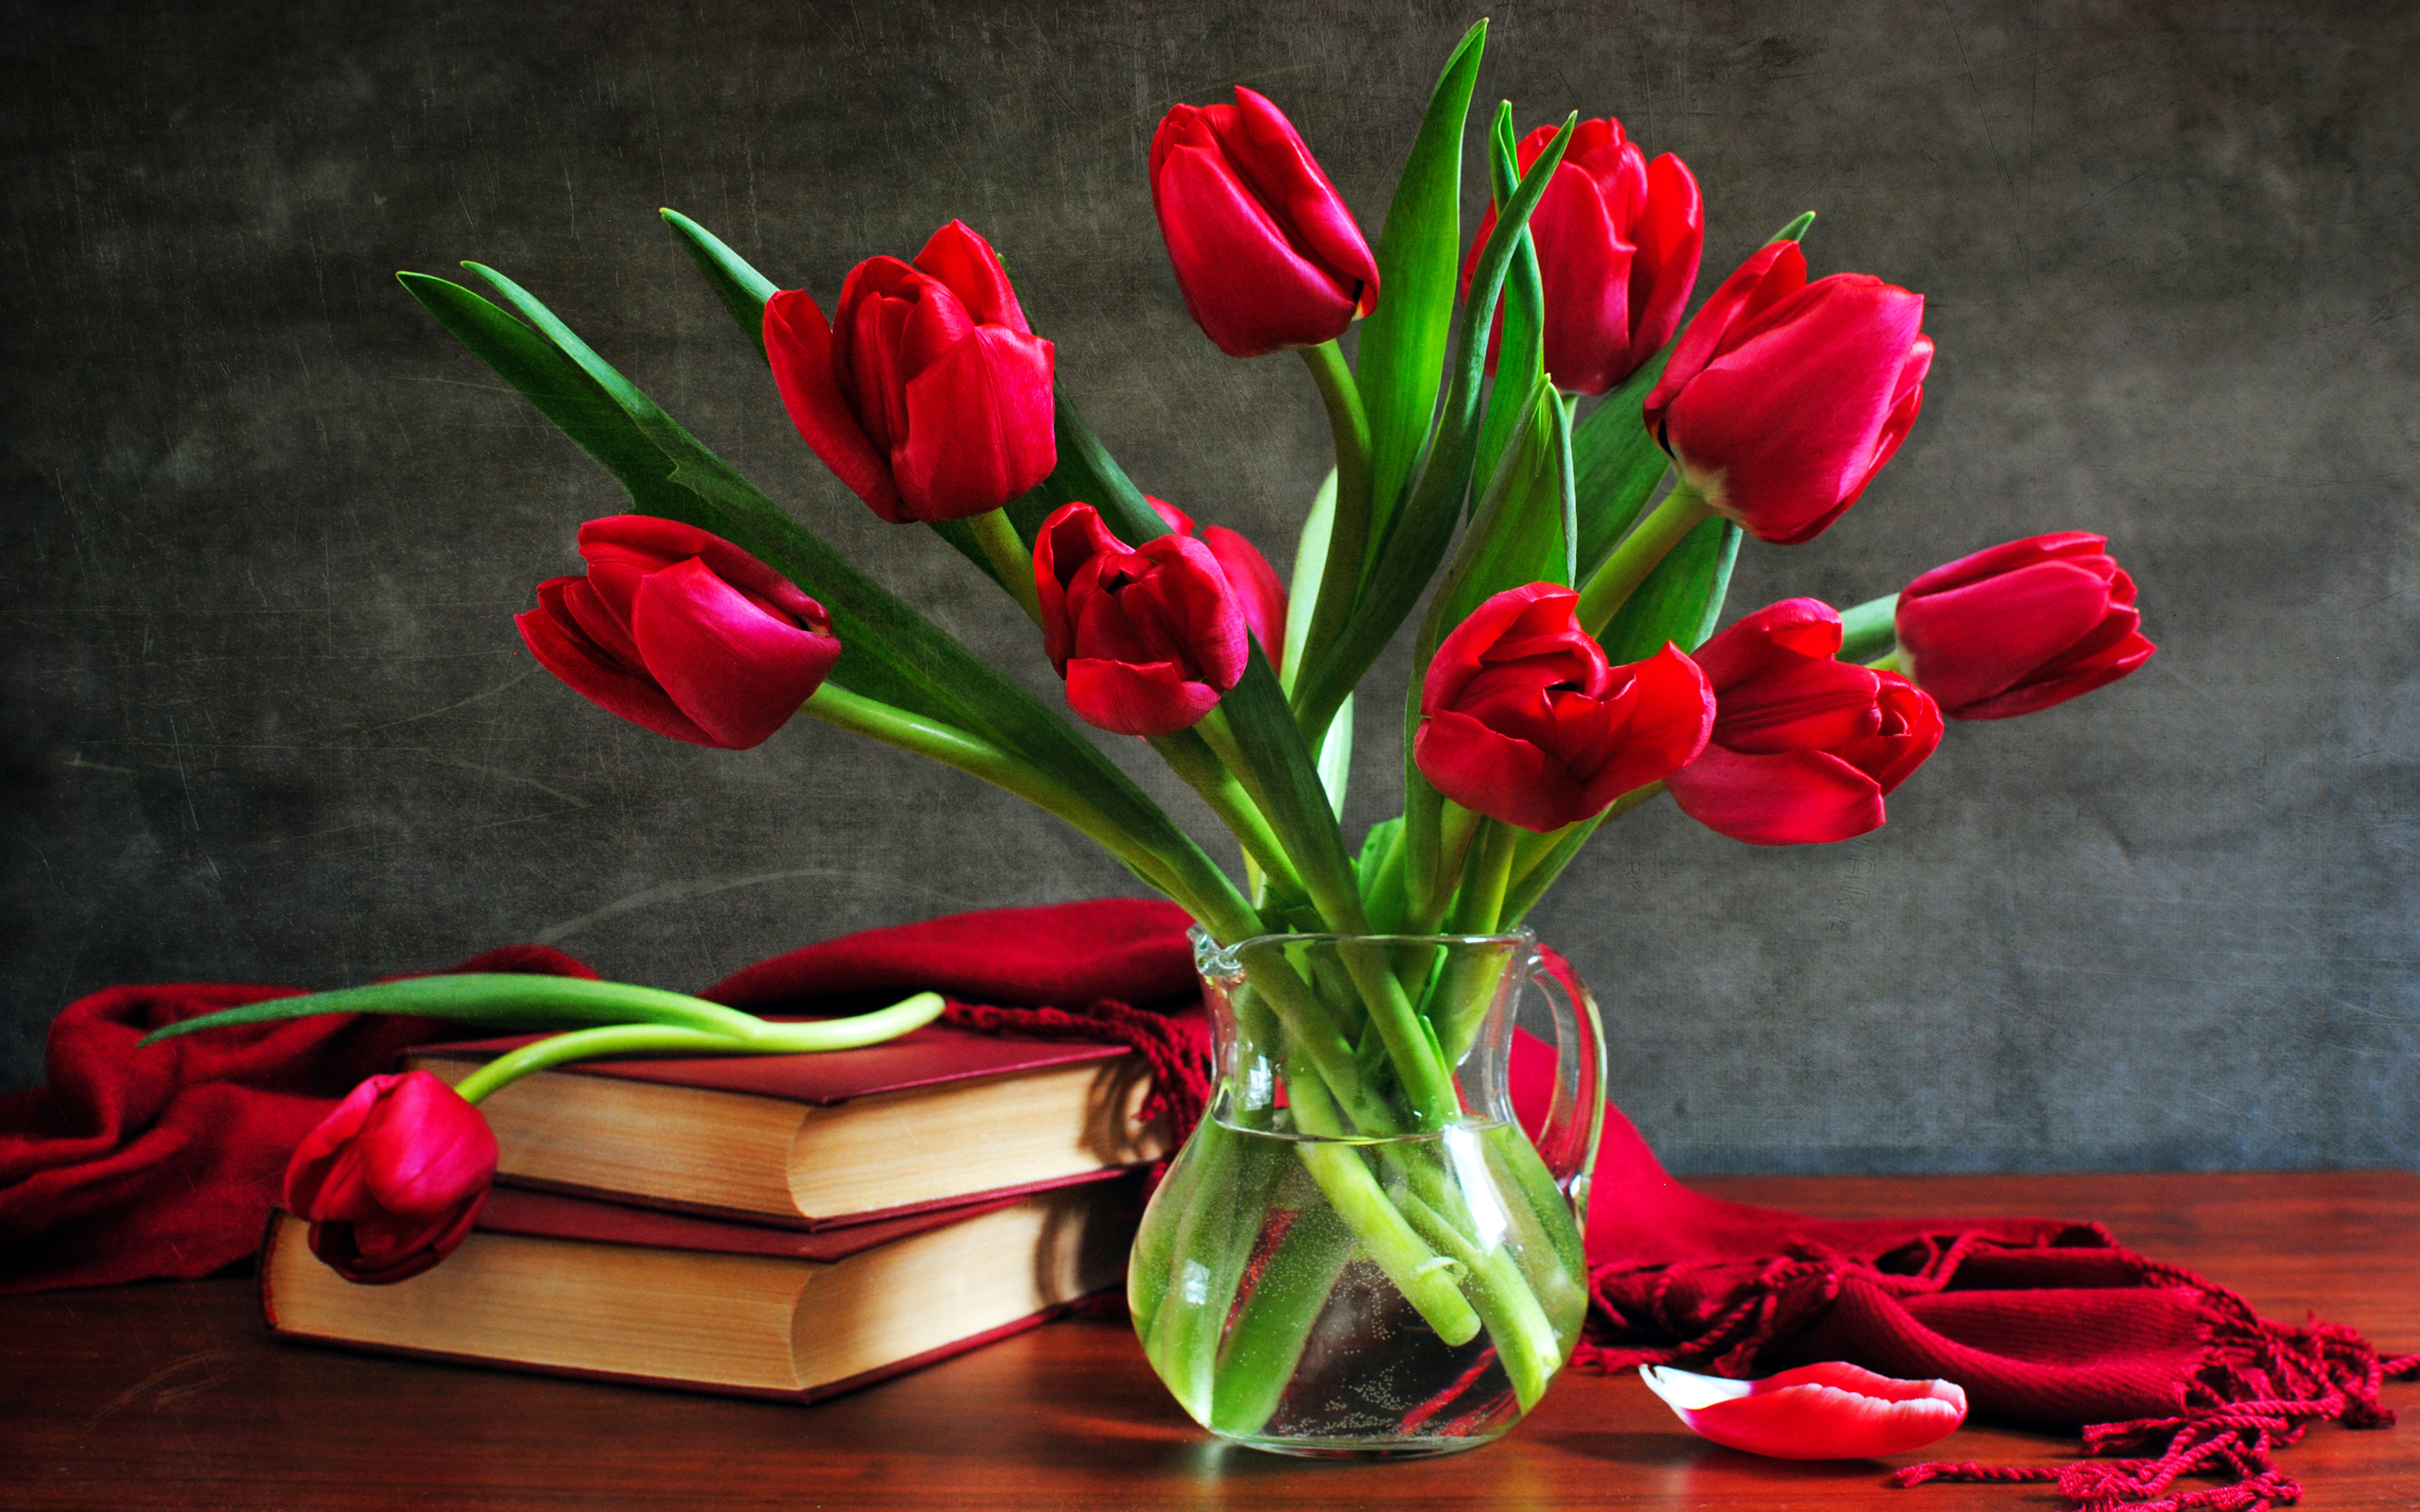 red flower, photography, still life, book, flower, pitcher, scarf, tulip images